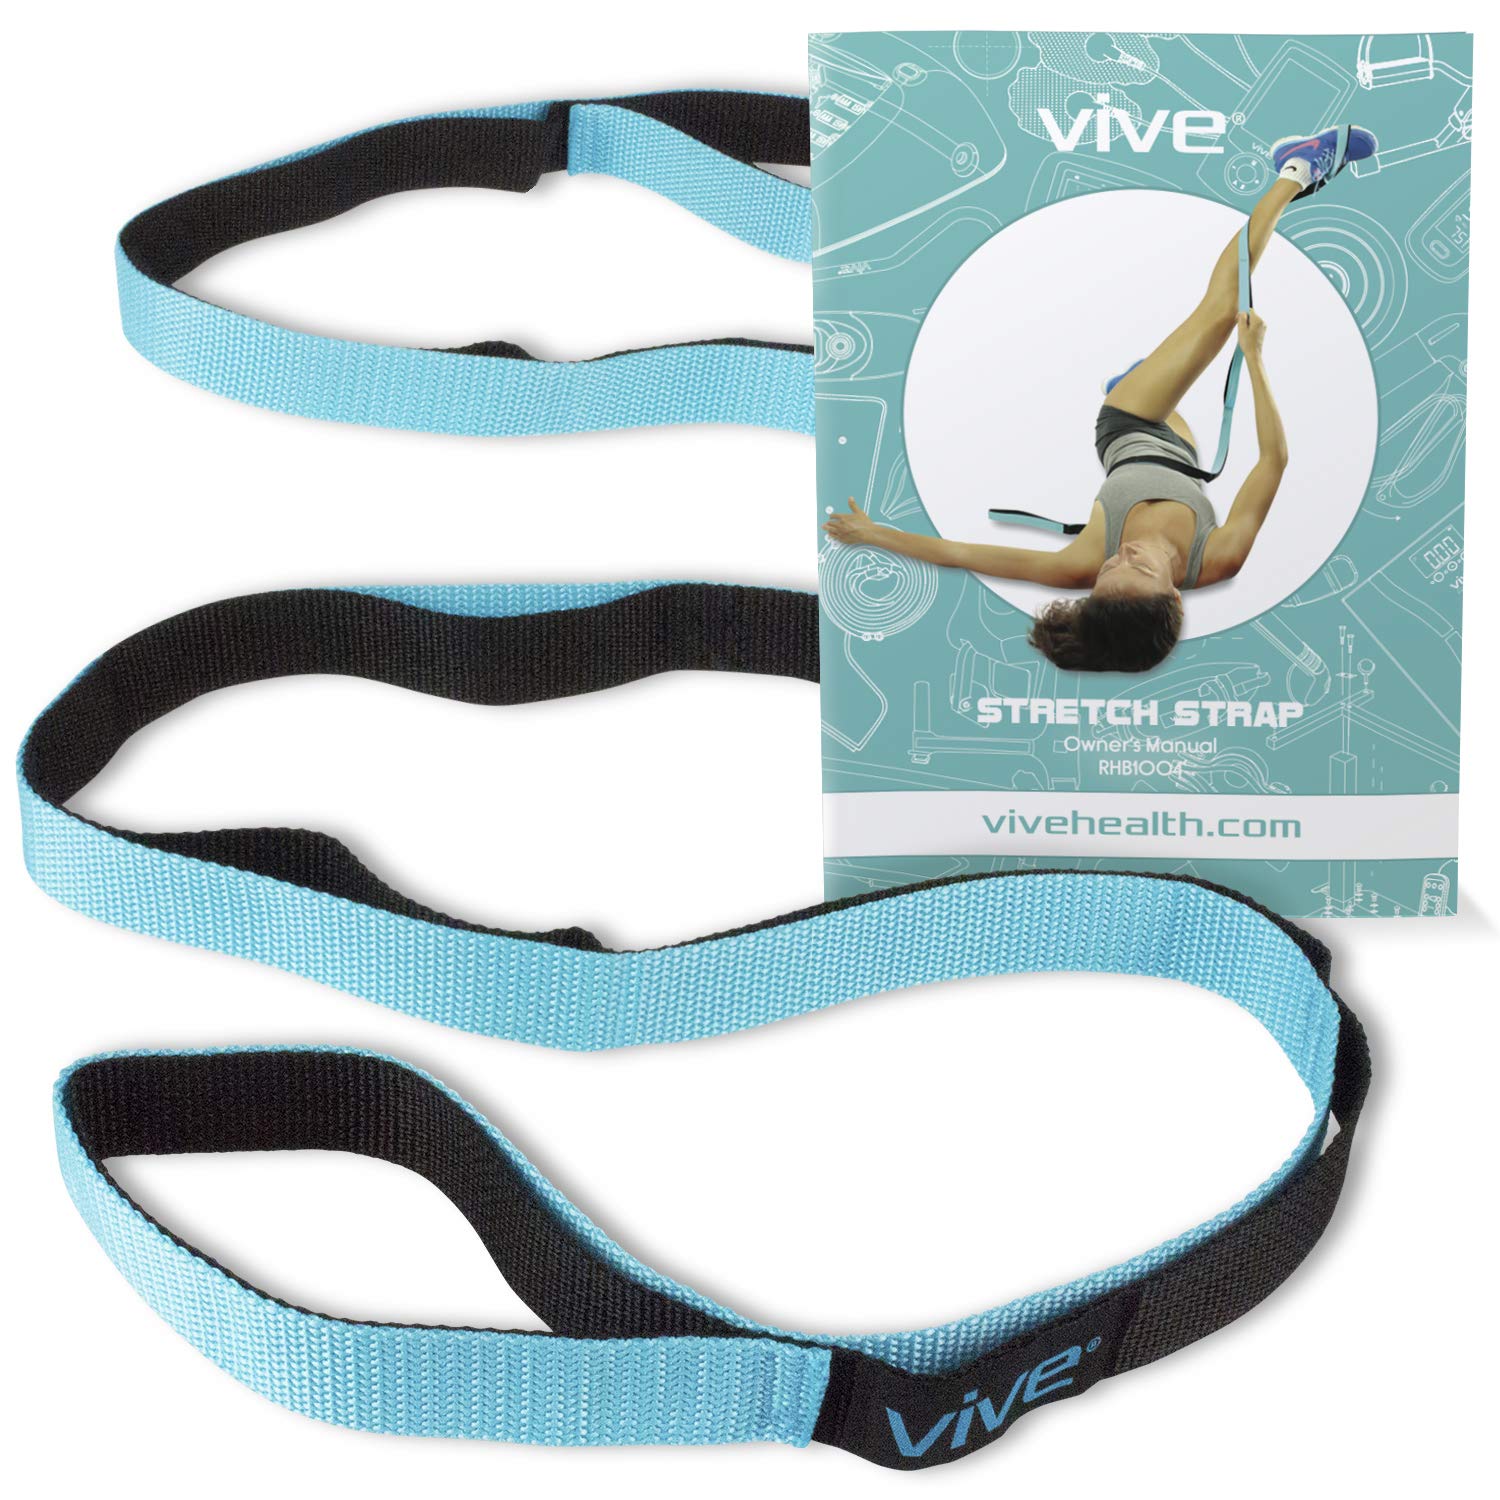 Vive Stretch Strap - Leg Stretch Band to Improve Flexibility - Stretching  Out Yoga Strap - Exercise and Physical Therapy Belt for Rehab Pilates Dance  and Gymnastics with Workout Guide Book Teal